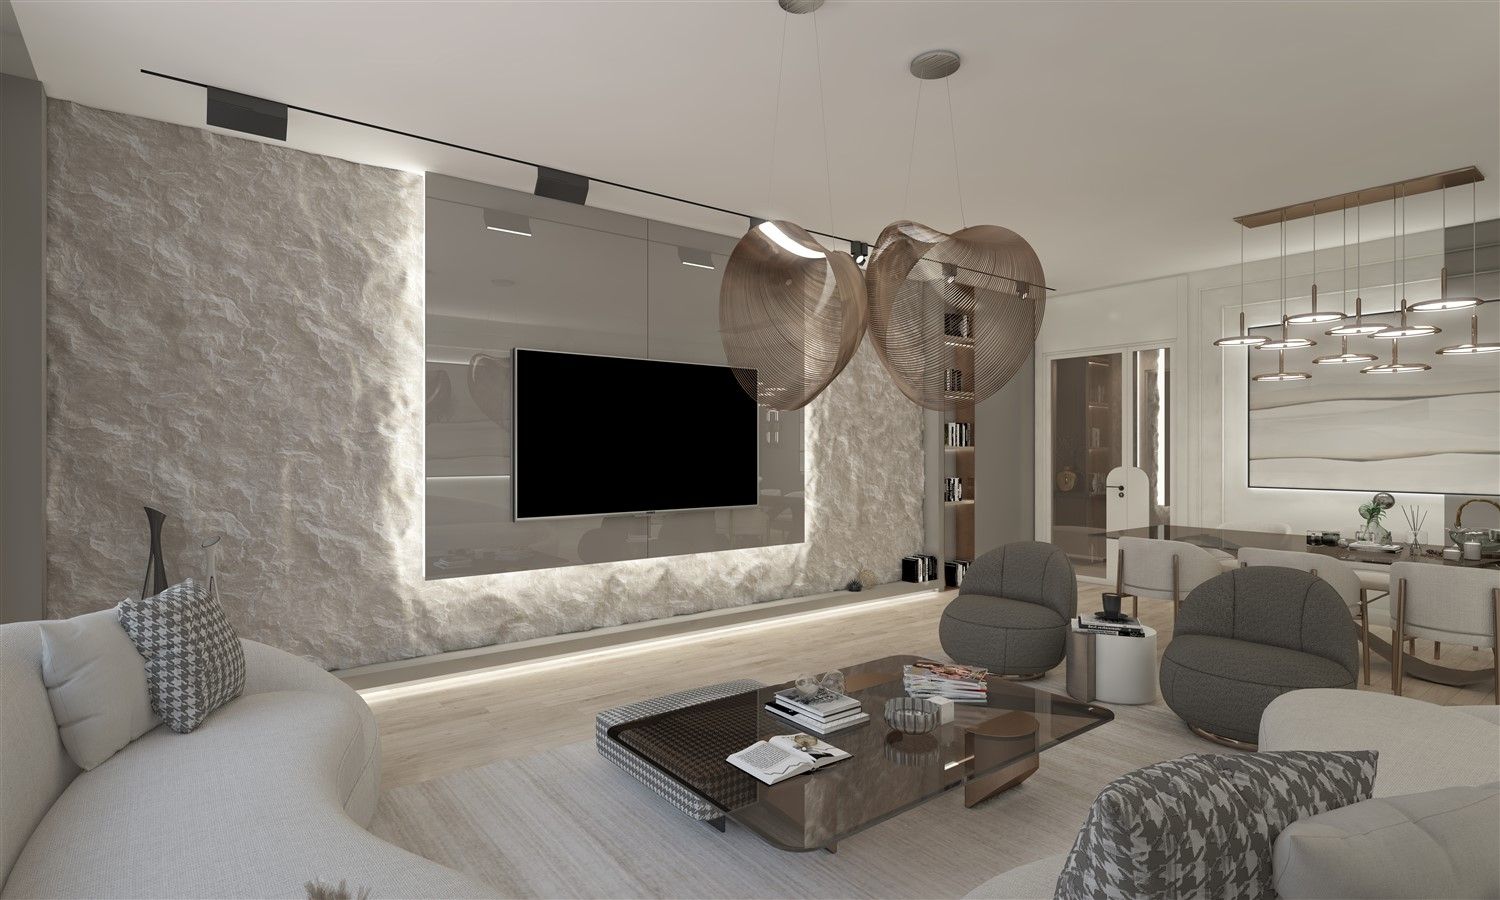 New complex of luxury villas with all amenities in Istanbul